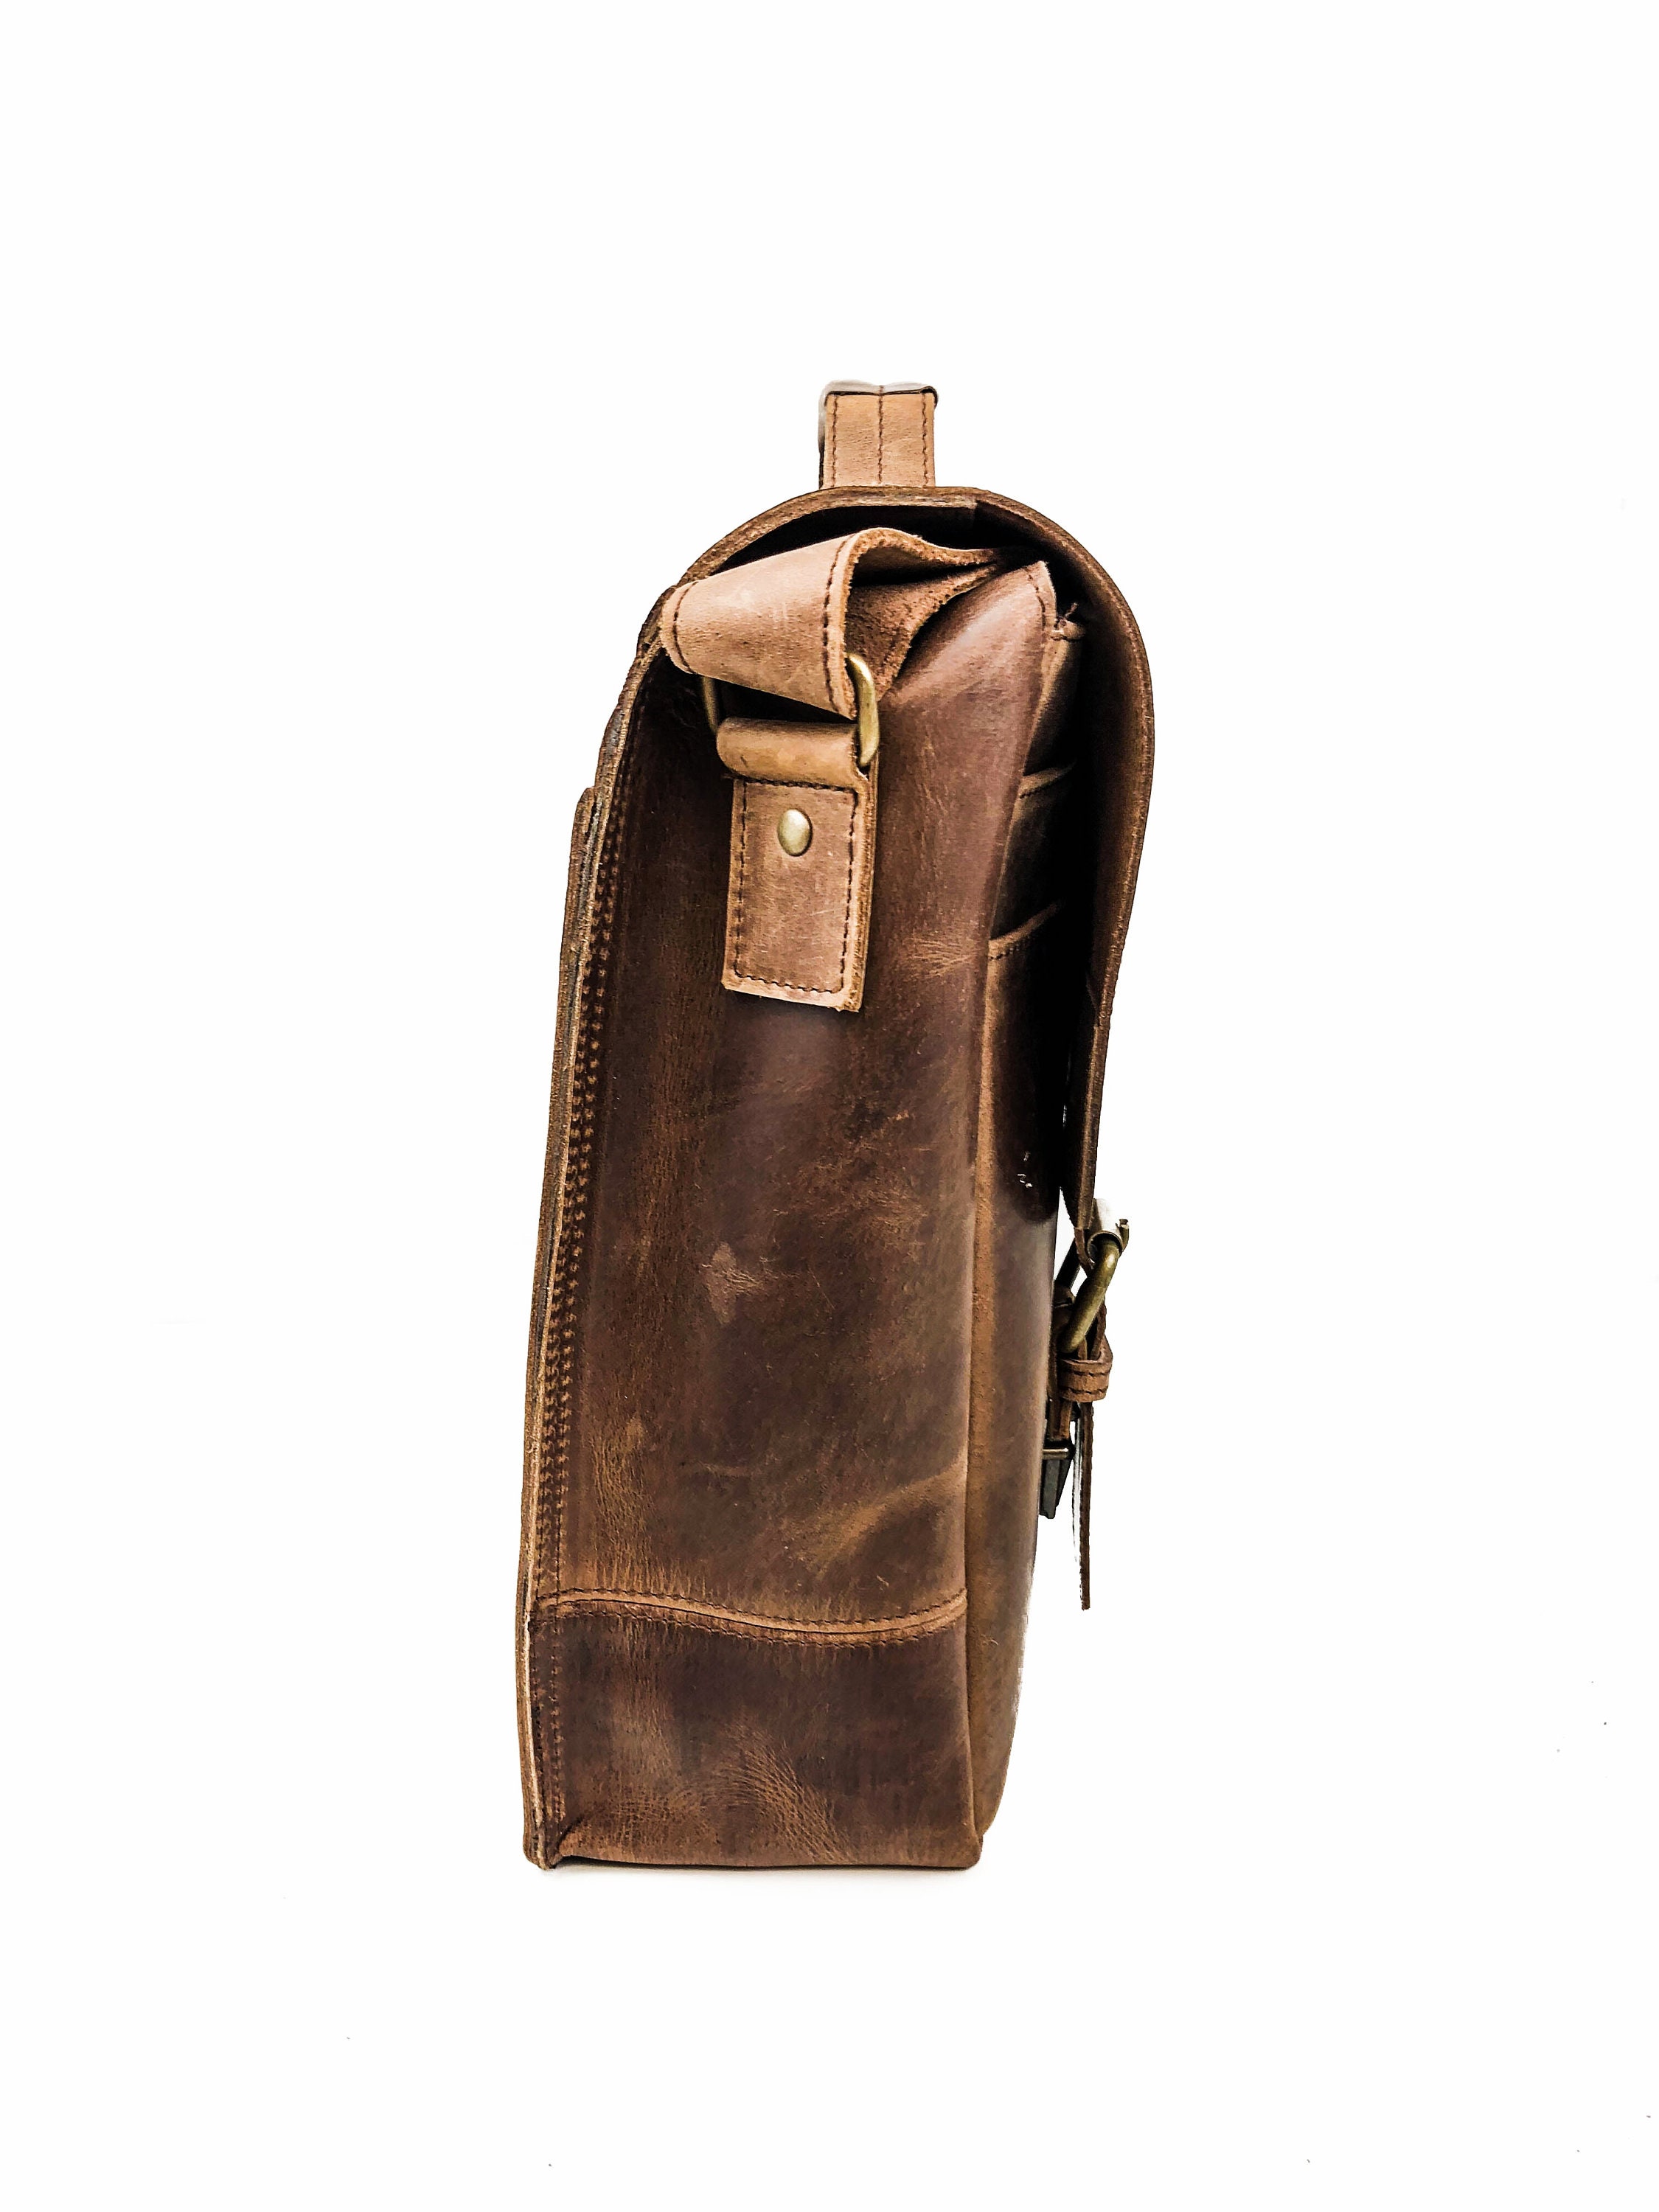 The Ultimate Full Grain Leather Messenger Bag Buyers Guide – The Real  Leather Company